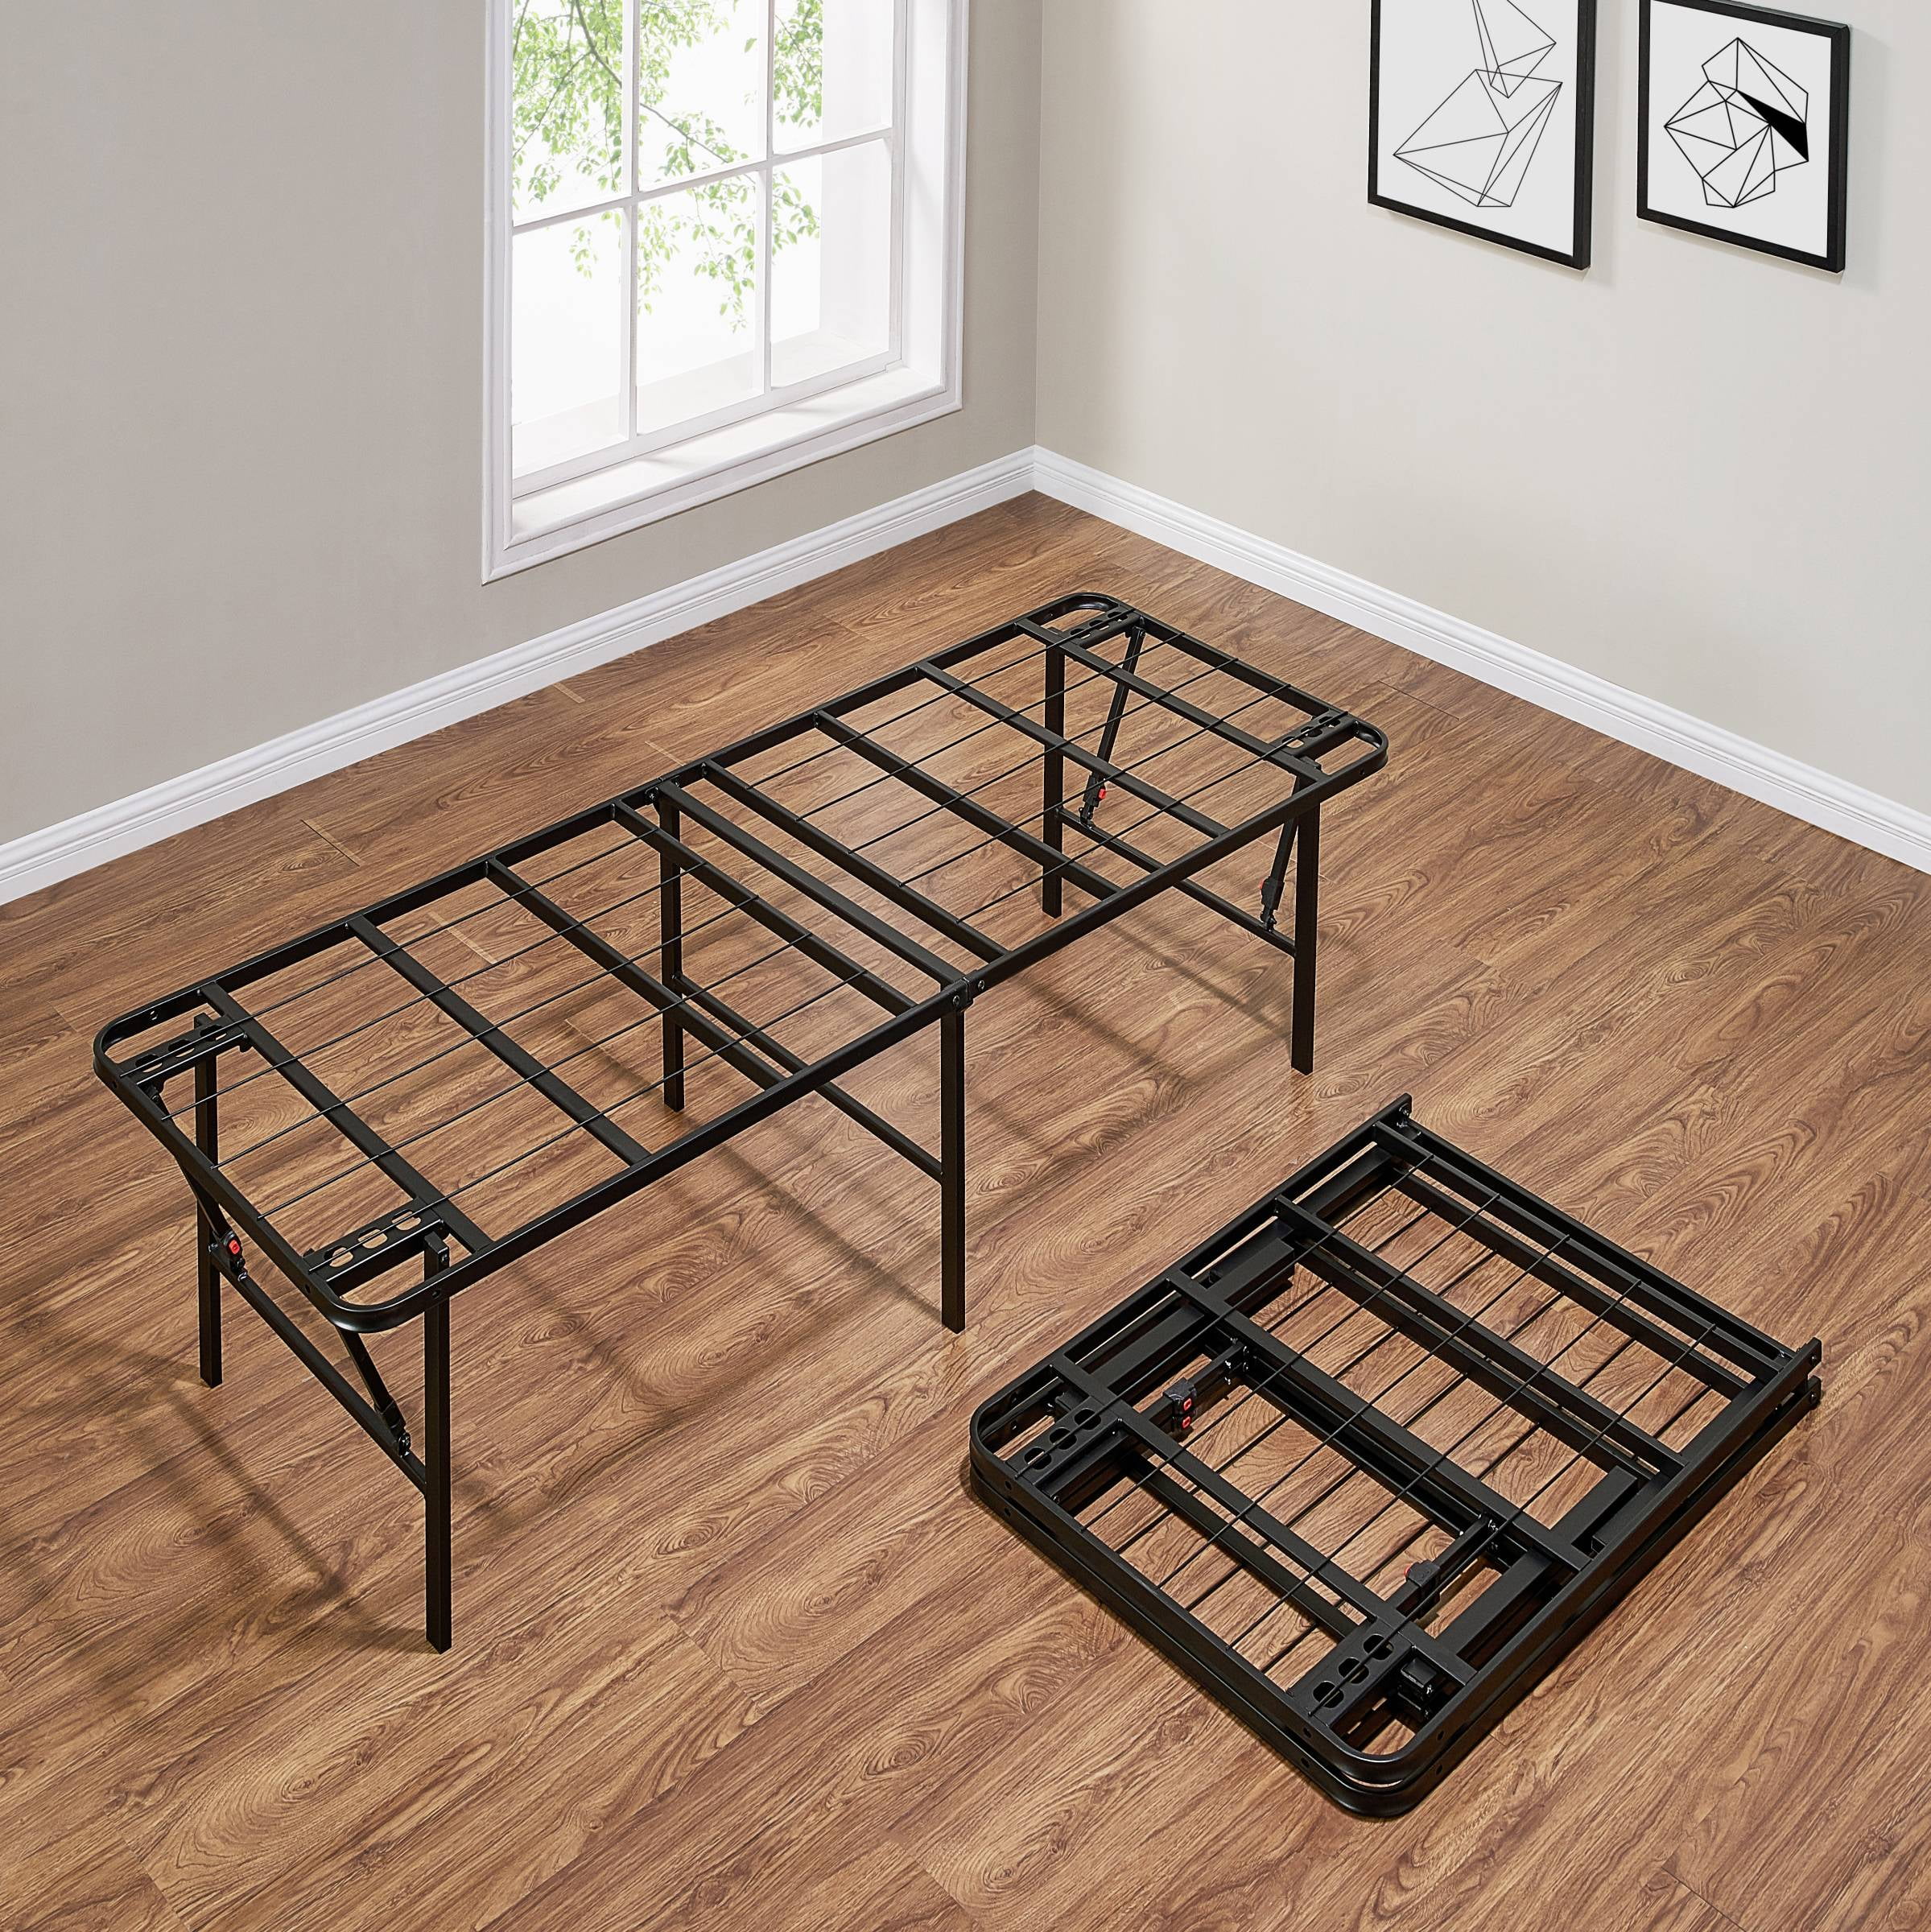 High Profile Foldable Steel Bed Frame, Best Collapsible Bed Frame